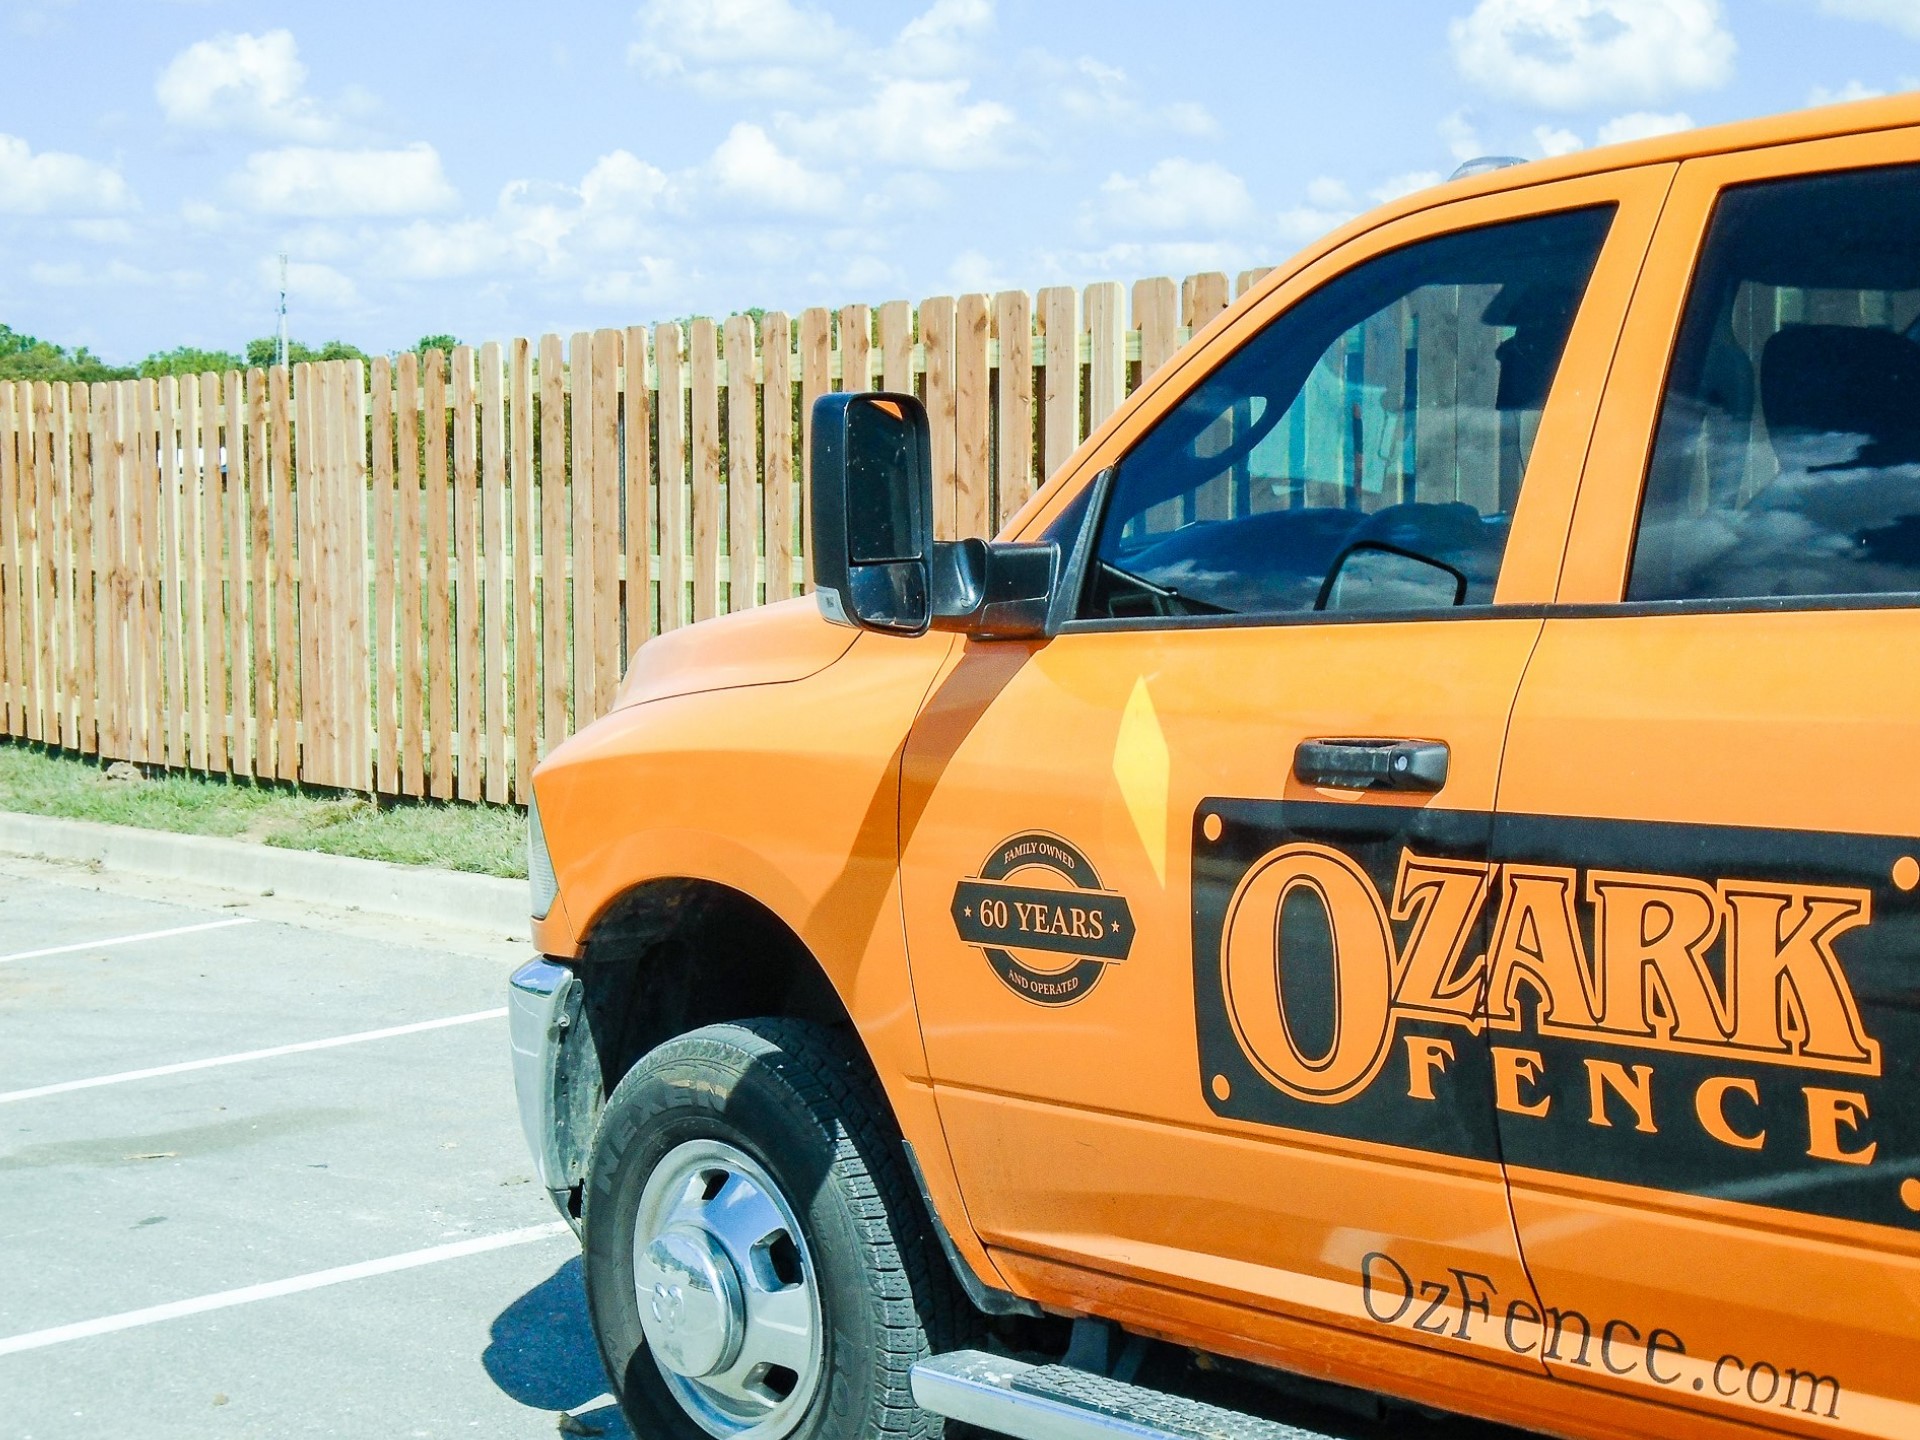 The Ozark Fence Company Difference in Ozark Missouri Fence Installations